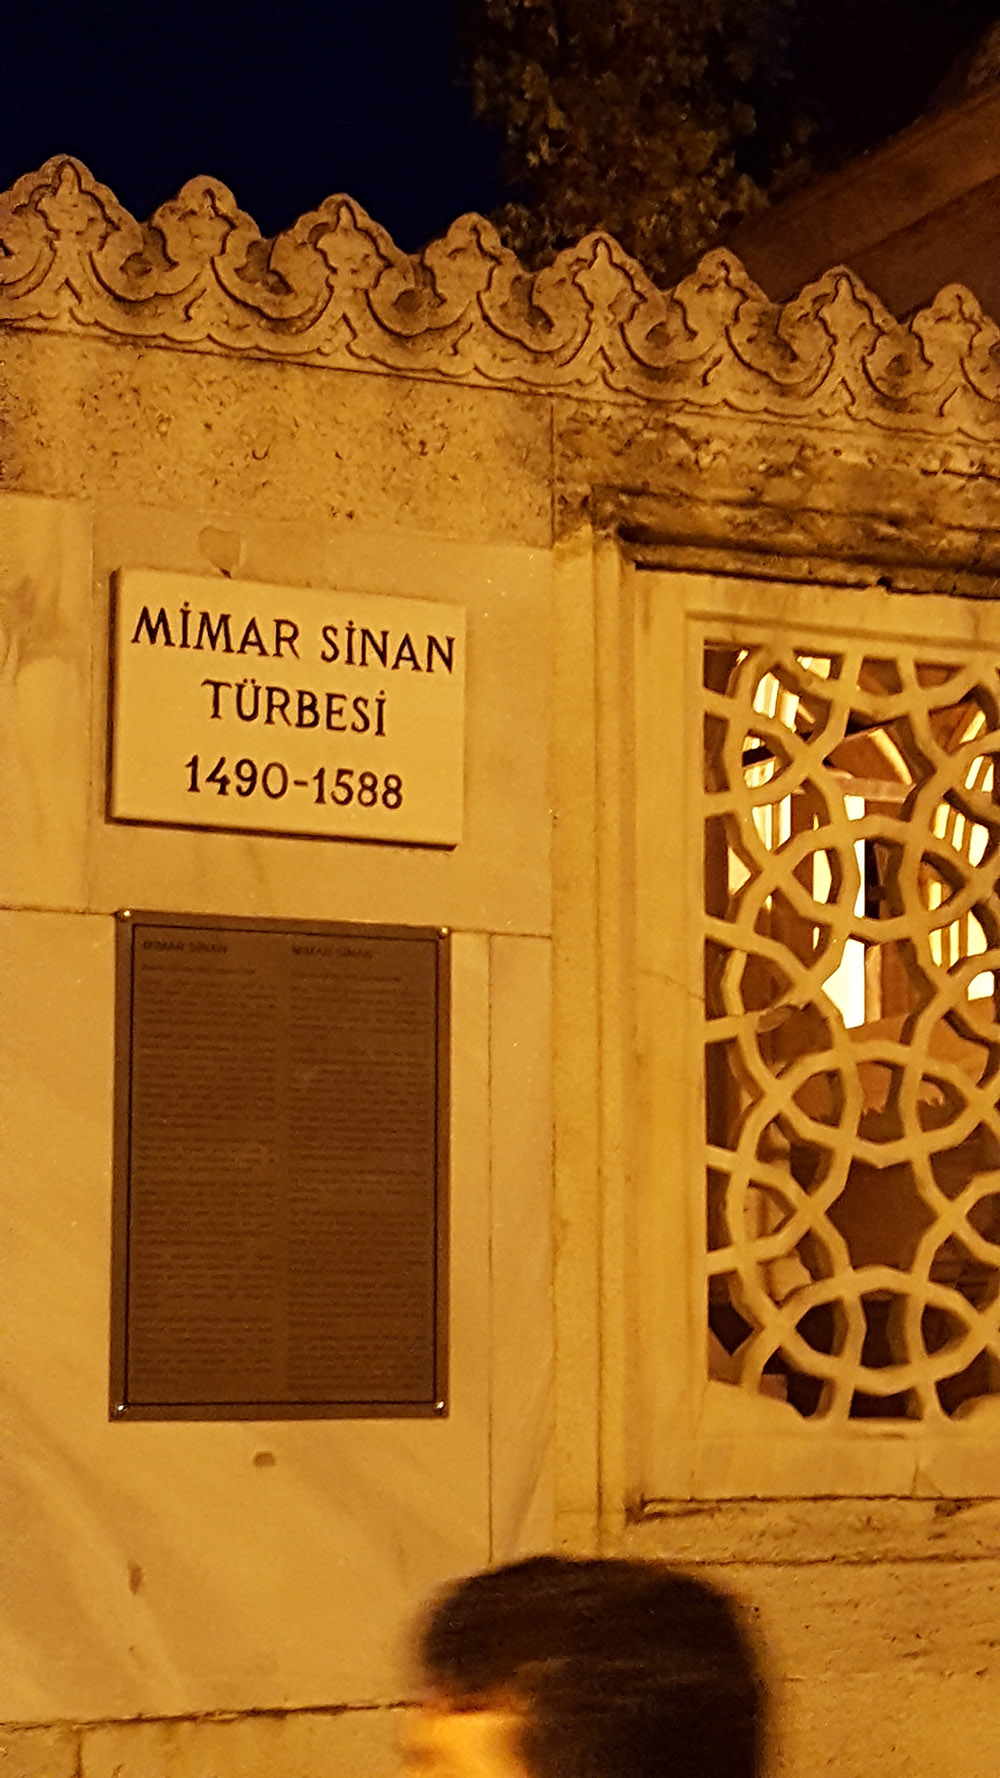 The modest tomb of one of the greatest Muslim Architect, Sinan, who was responsible for designing the best of Turkish Buildings